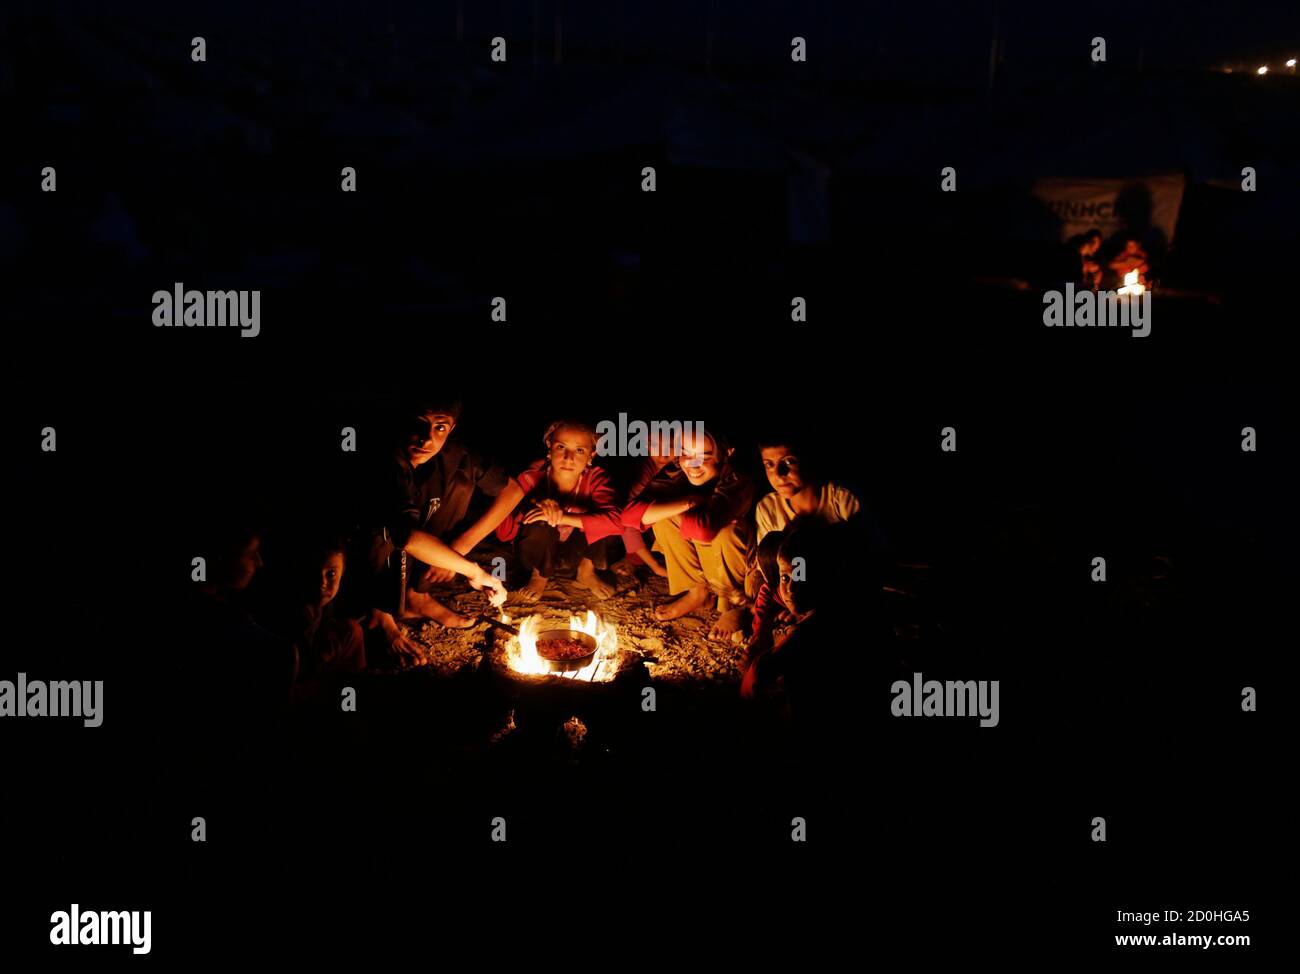 Children from the minority Yazidi sect, who fled violence in the Iraqi town of Sinjar, wait for food by a fire in Bajed Kadal refugee camp, southwest of Dohuk province August 22, 2014. REUTERS/Youssef Boudlal (IRAQ - Tags: CIVIL UNREST POLITICS CONFLICT TPX IMAGES OF THE DAY FOOD SOCIETY) Stock Photo